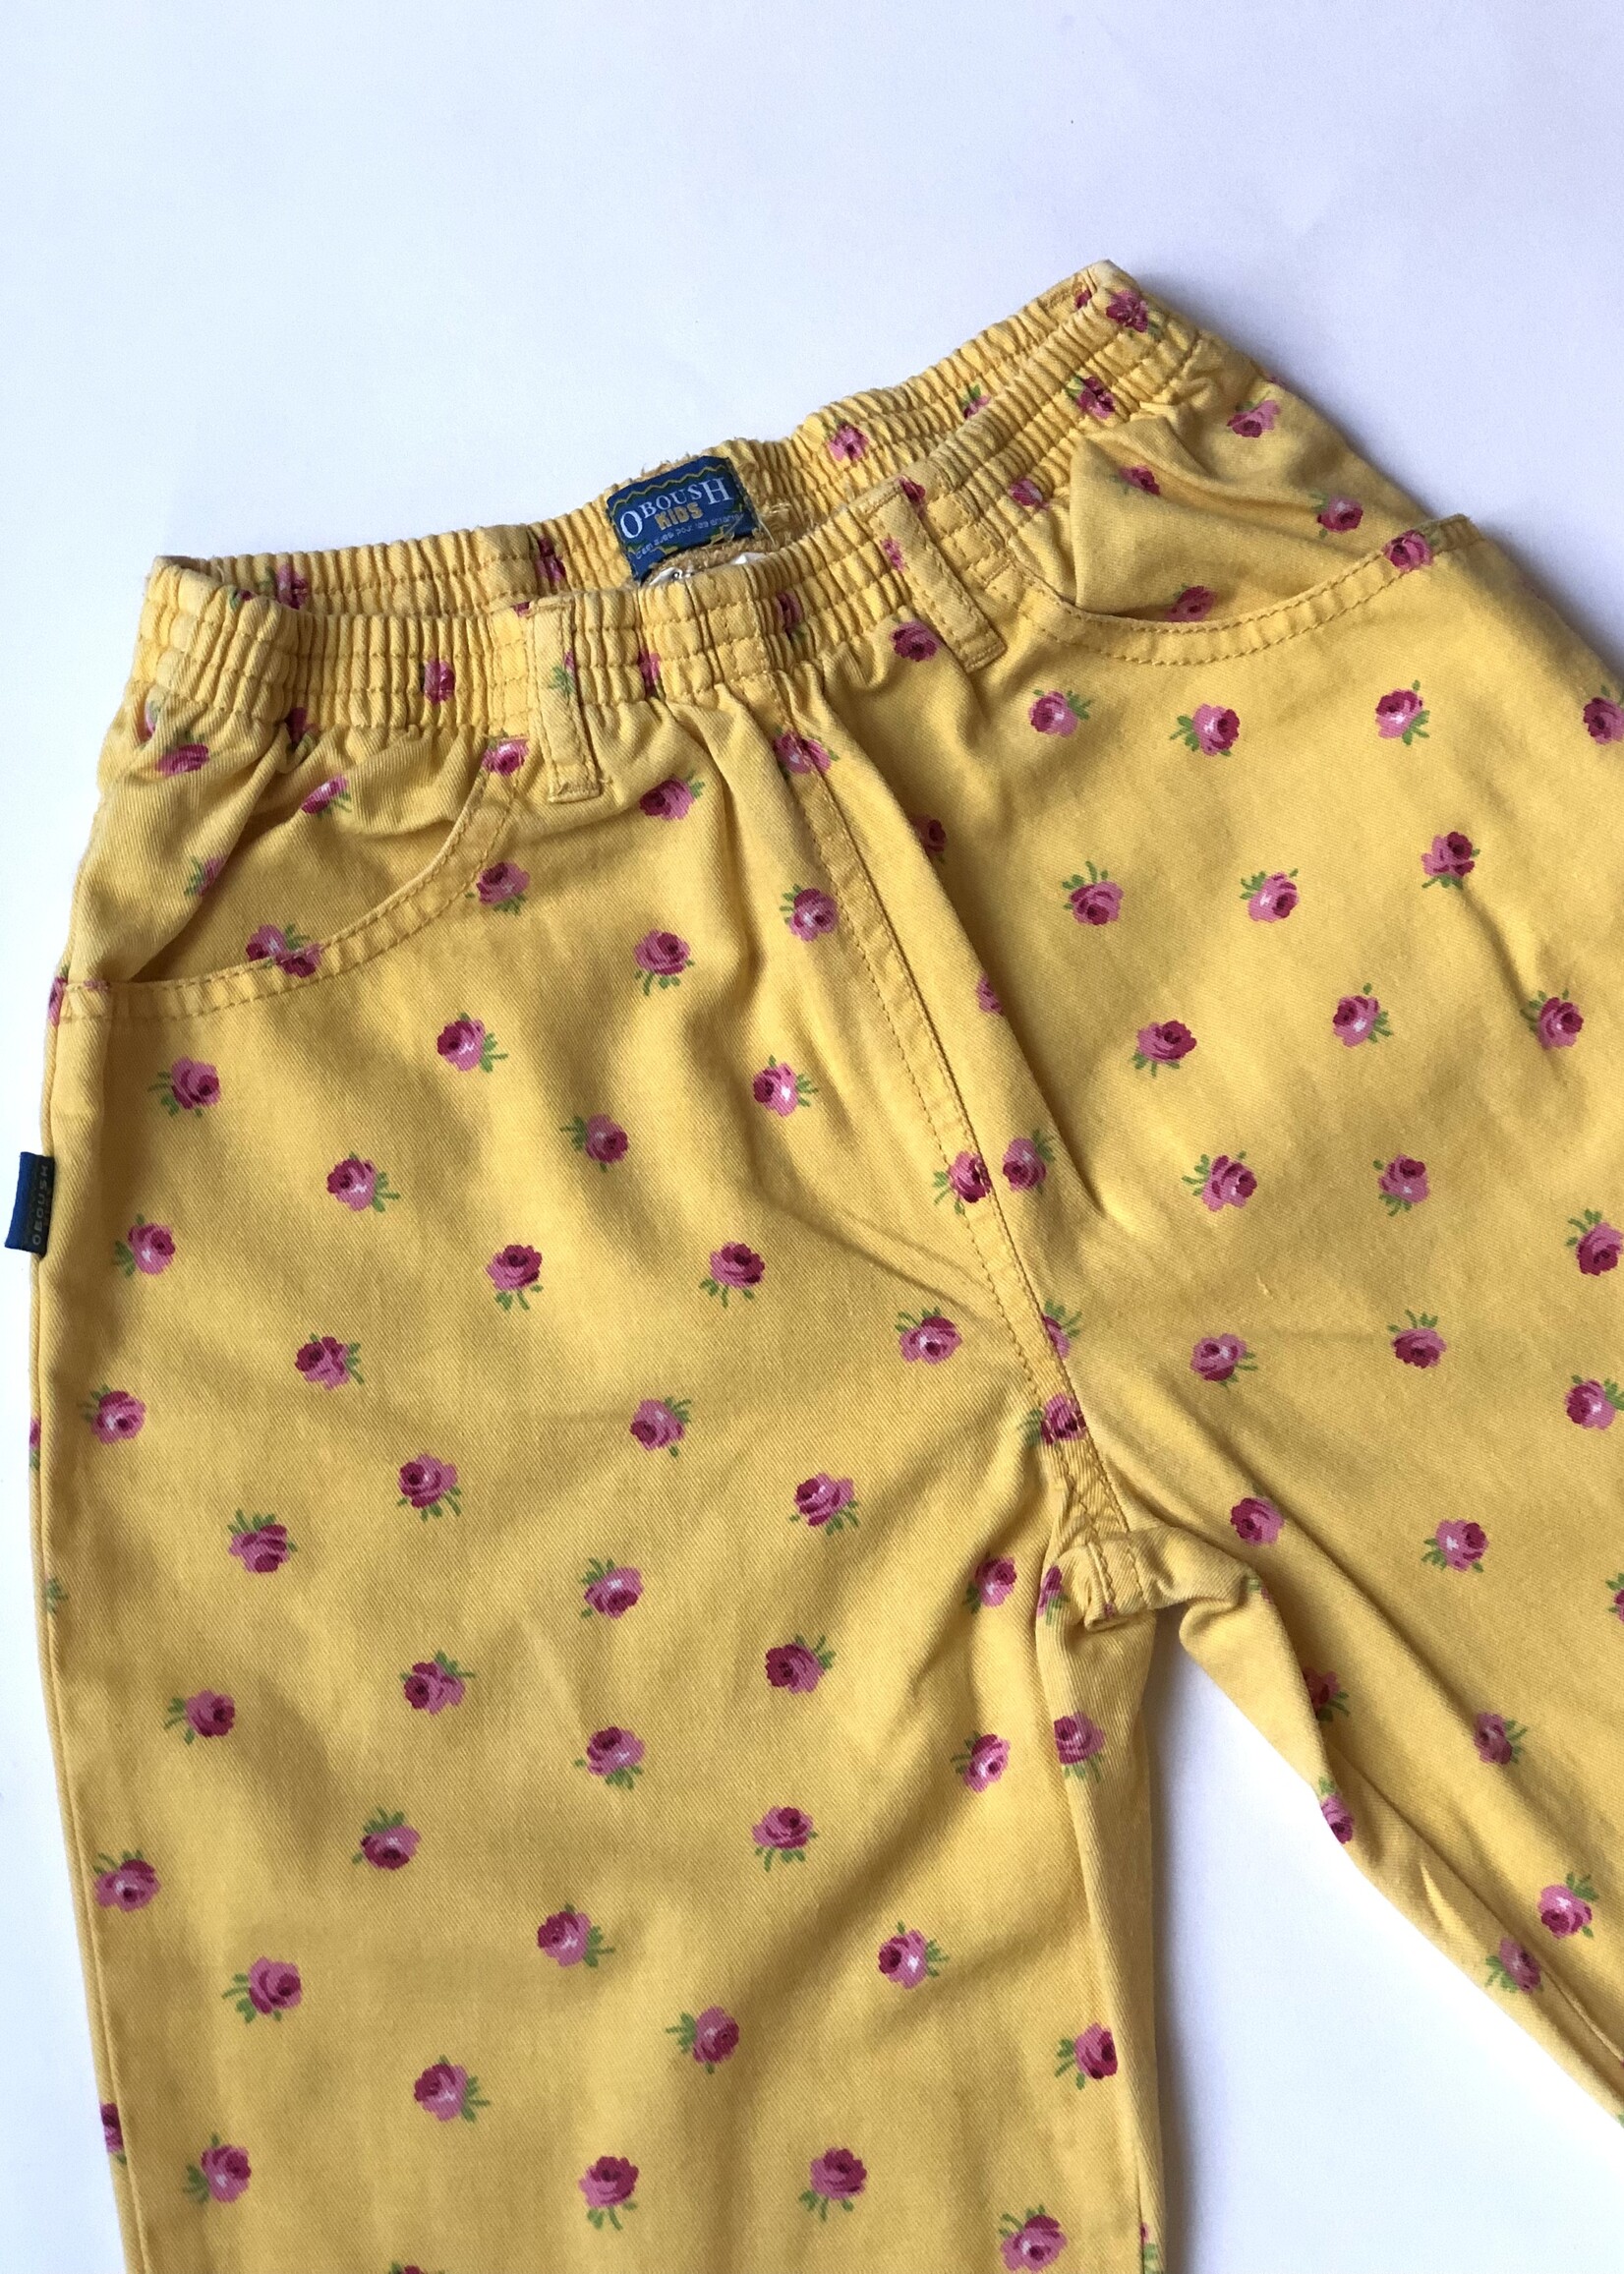 Vintage Yellow roses jeans 8y